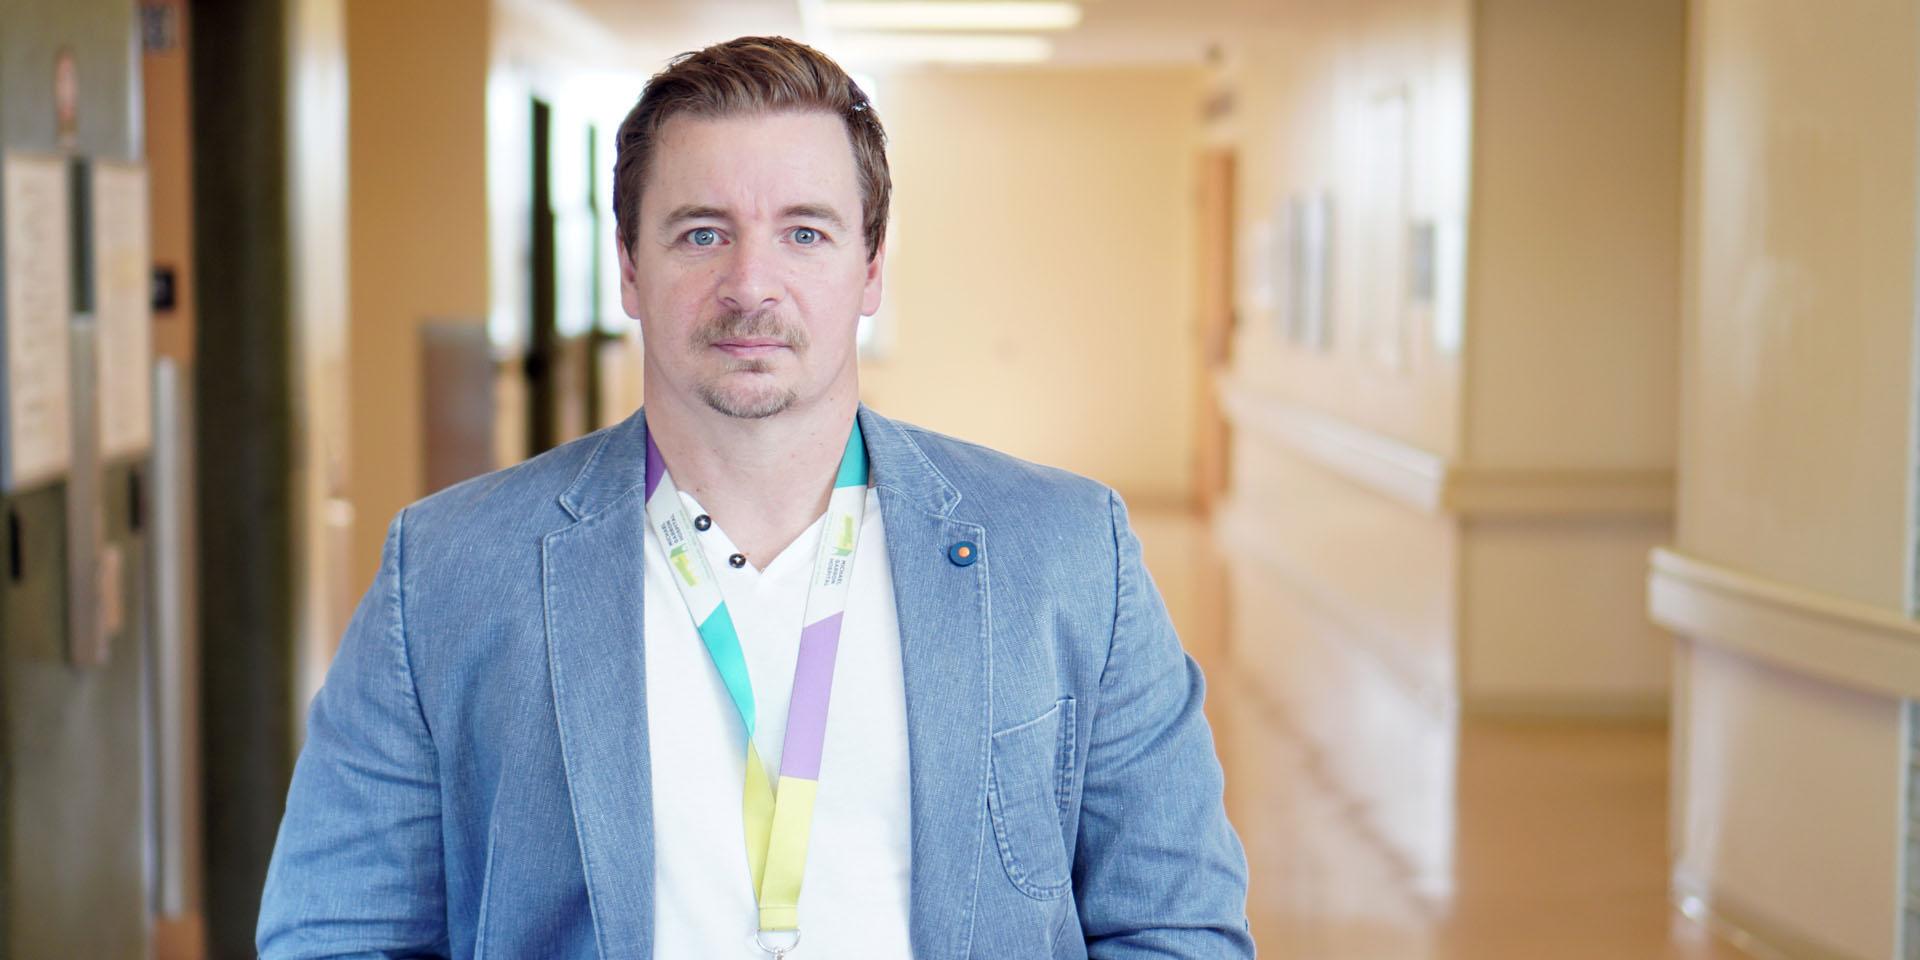 Sean Healey, Social Worker at Michael Garron hospital, experiences firsthand the complex and emotionally-charged cases healthcare providers manage on a daily basis. (Photo: MGH)